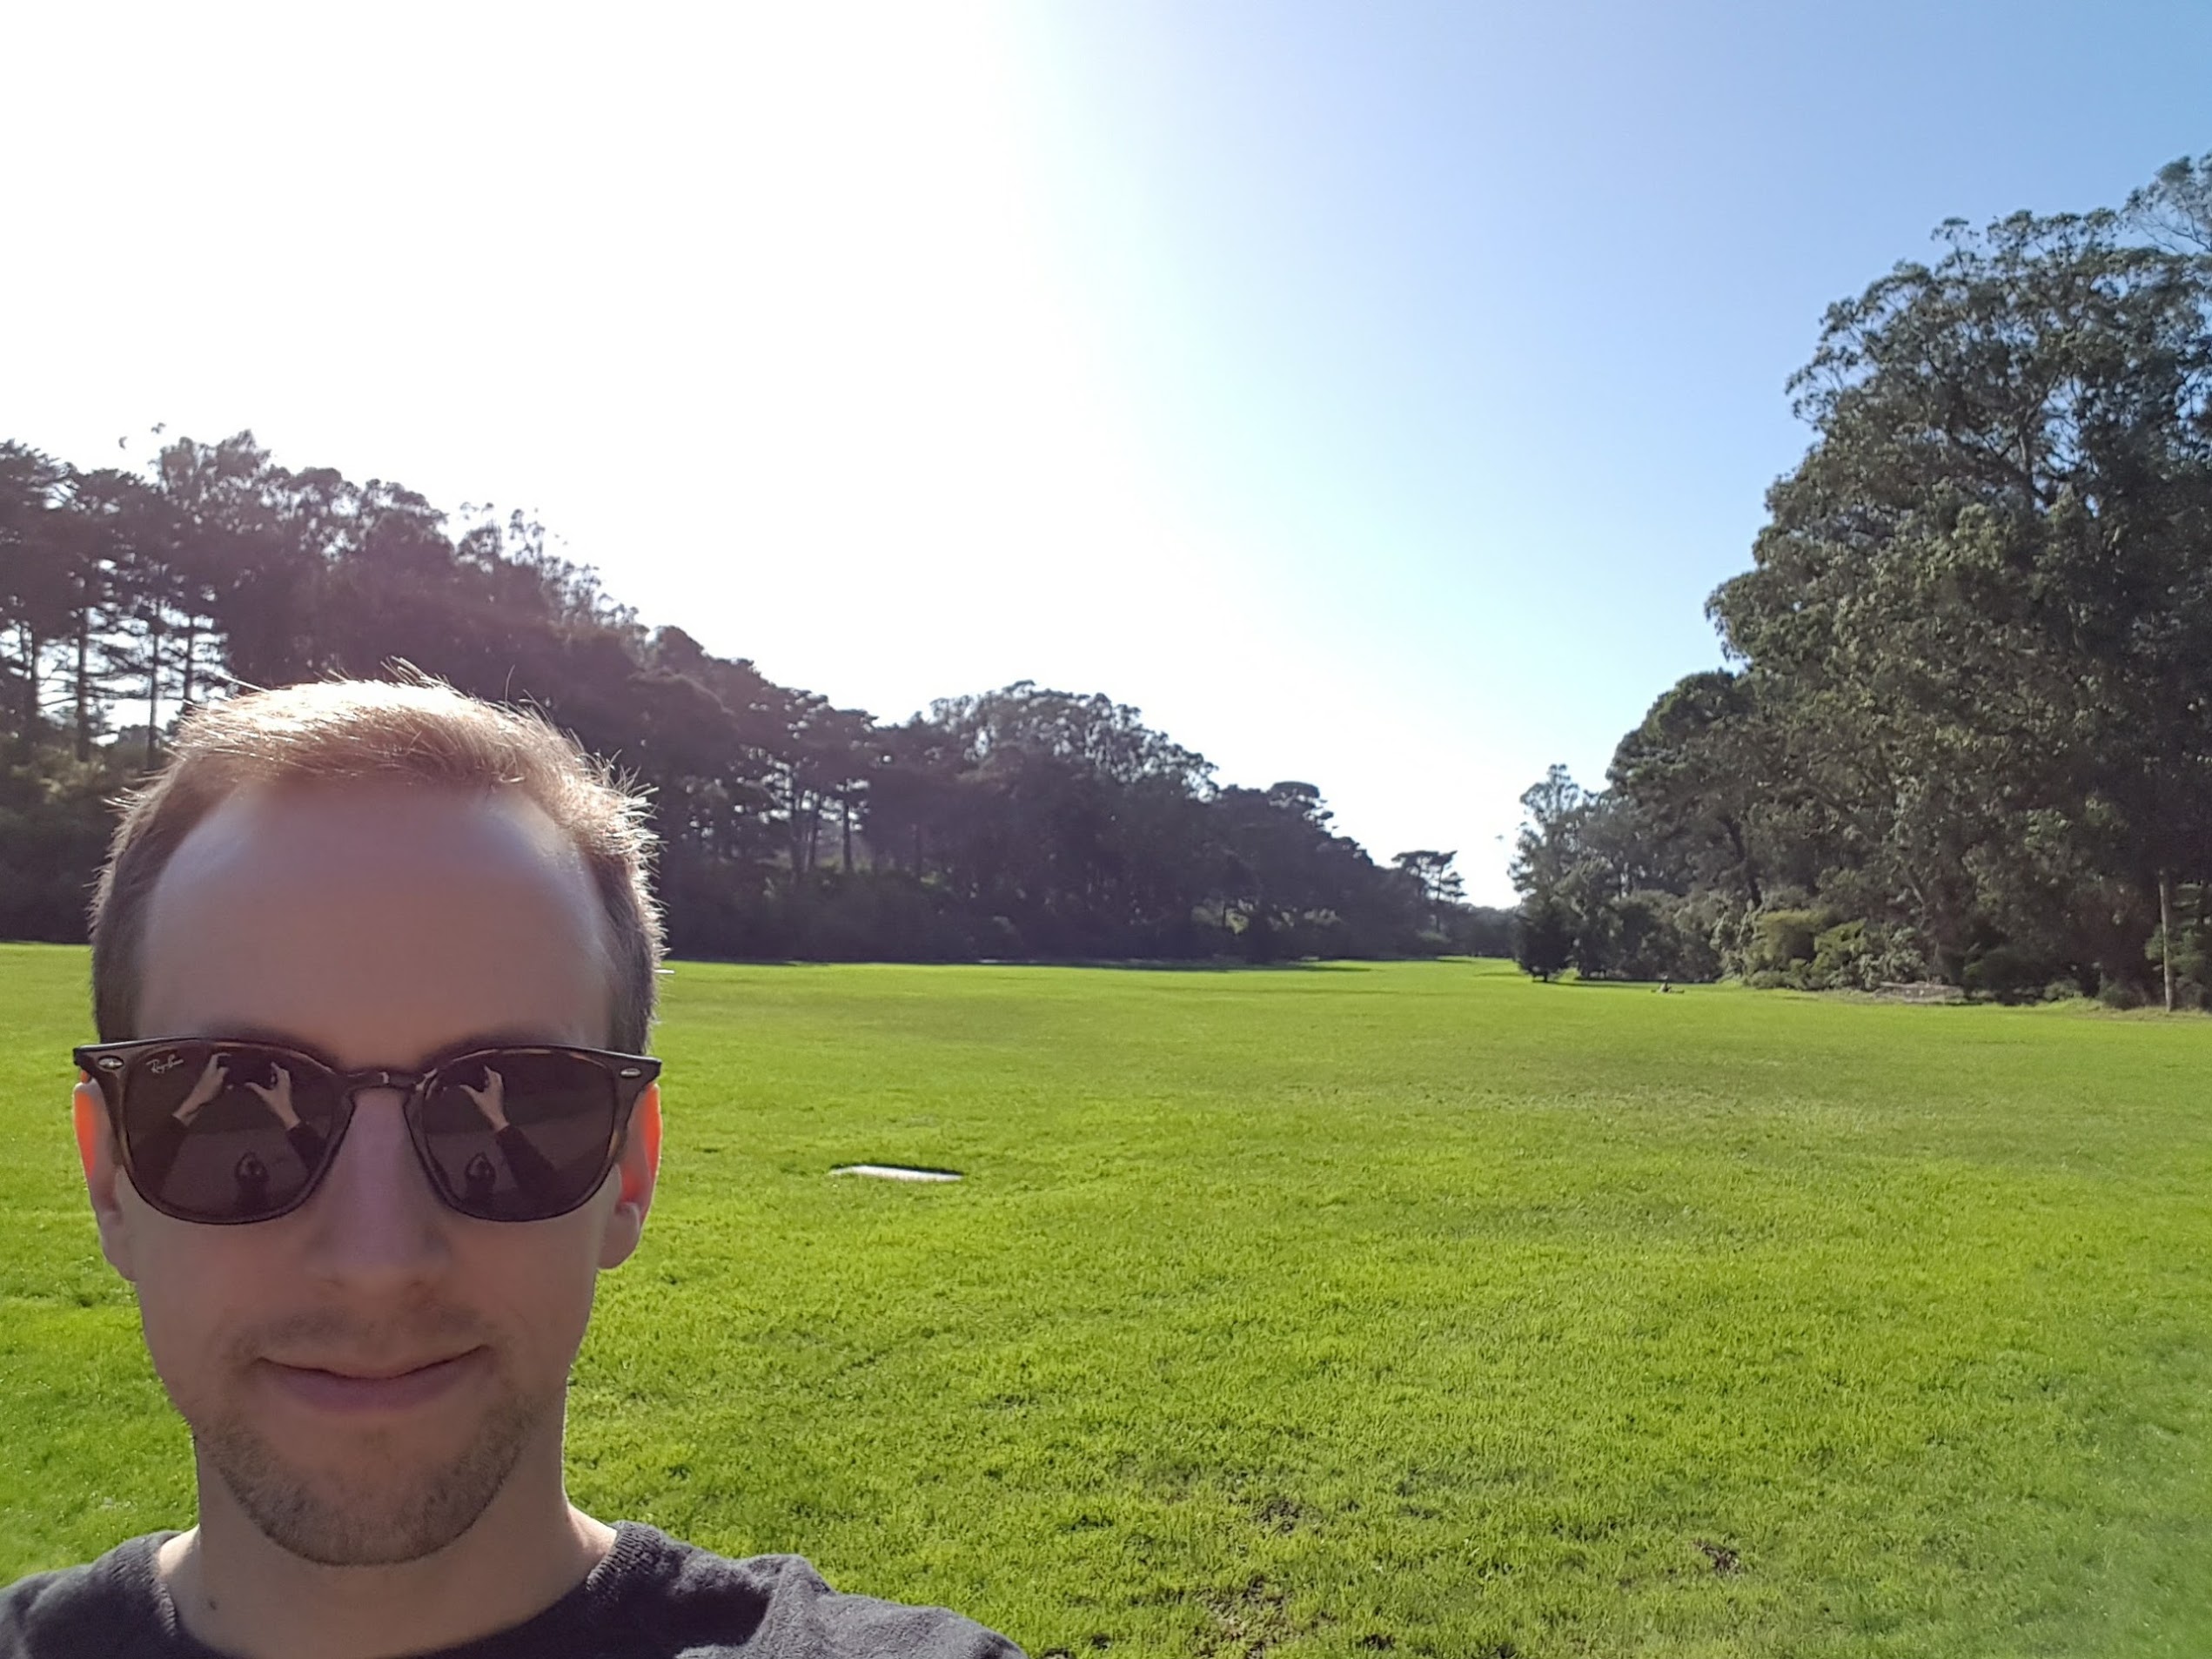 The author taking a picture of himself in Golden Gate Park